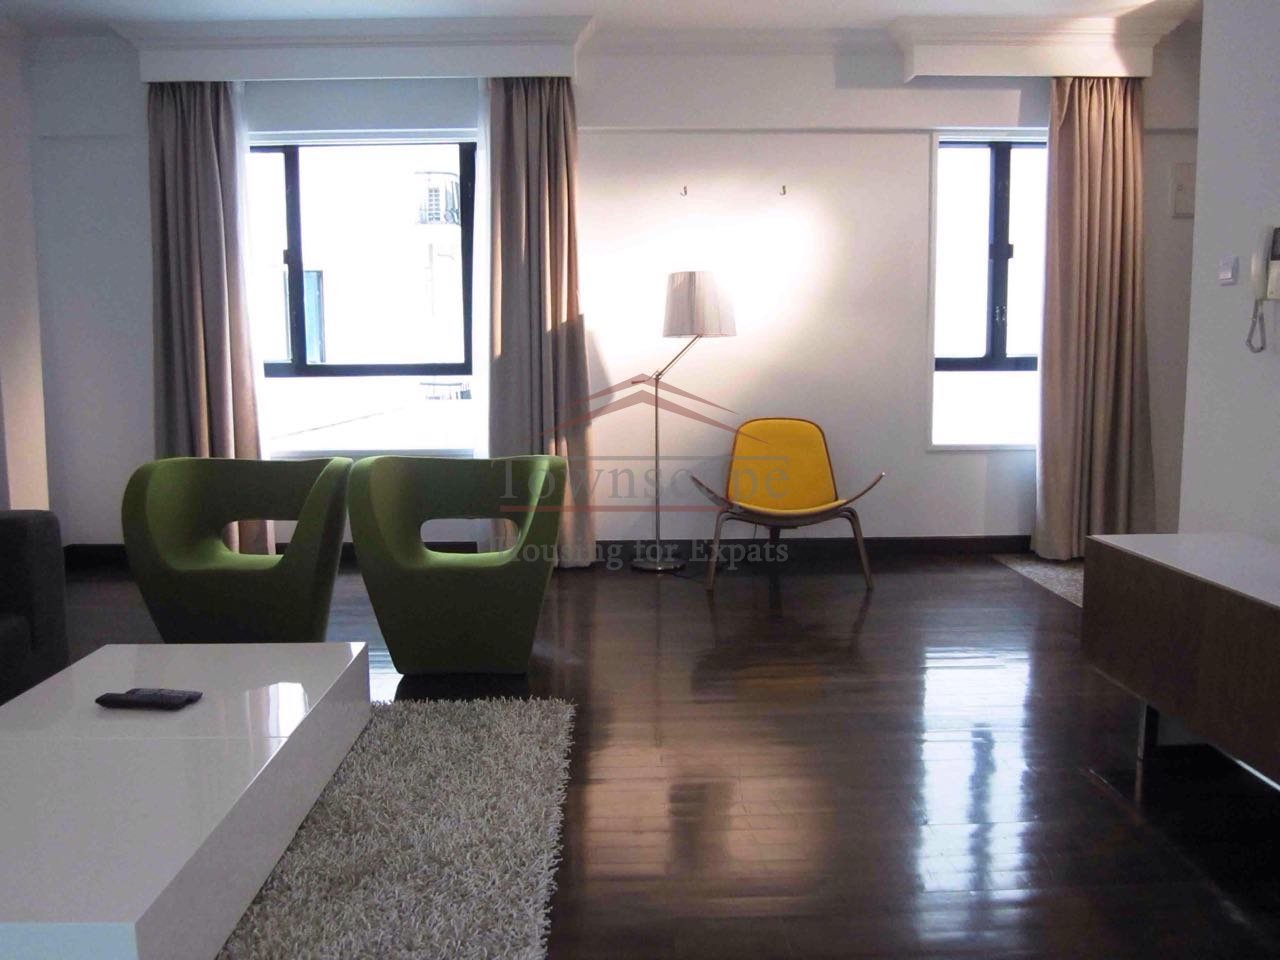 French Concession Fantastic 2 Bedroom Apartment in Shanghai French Concession